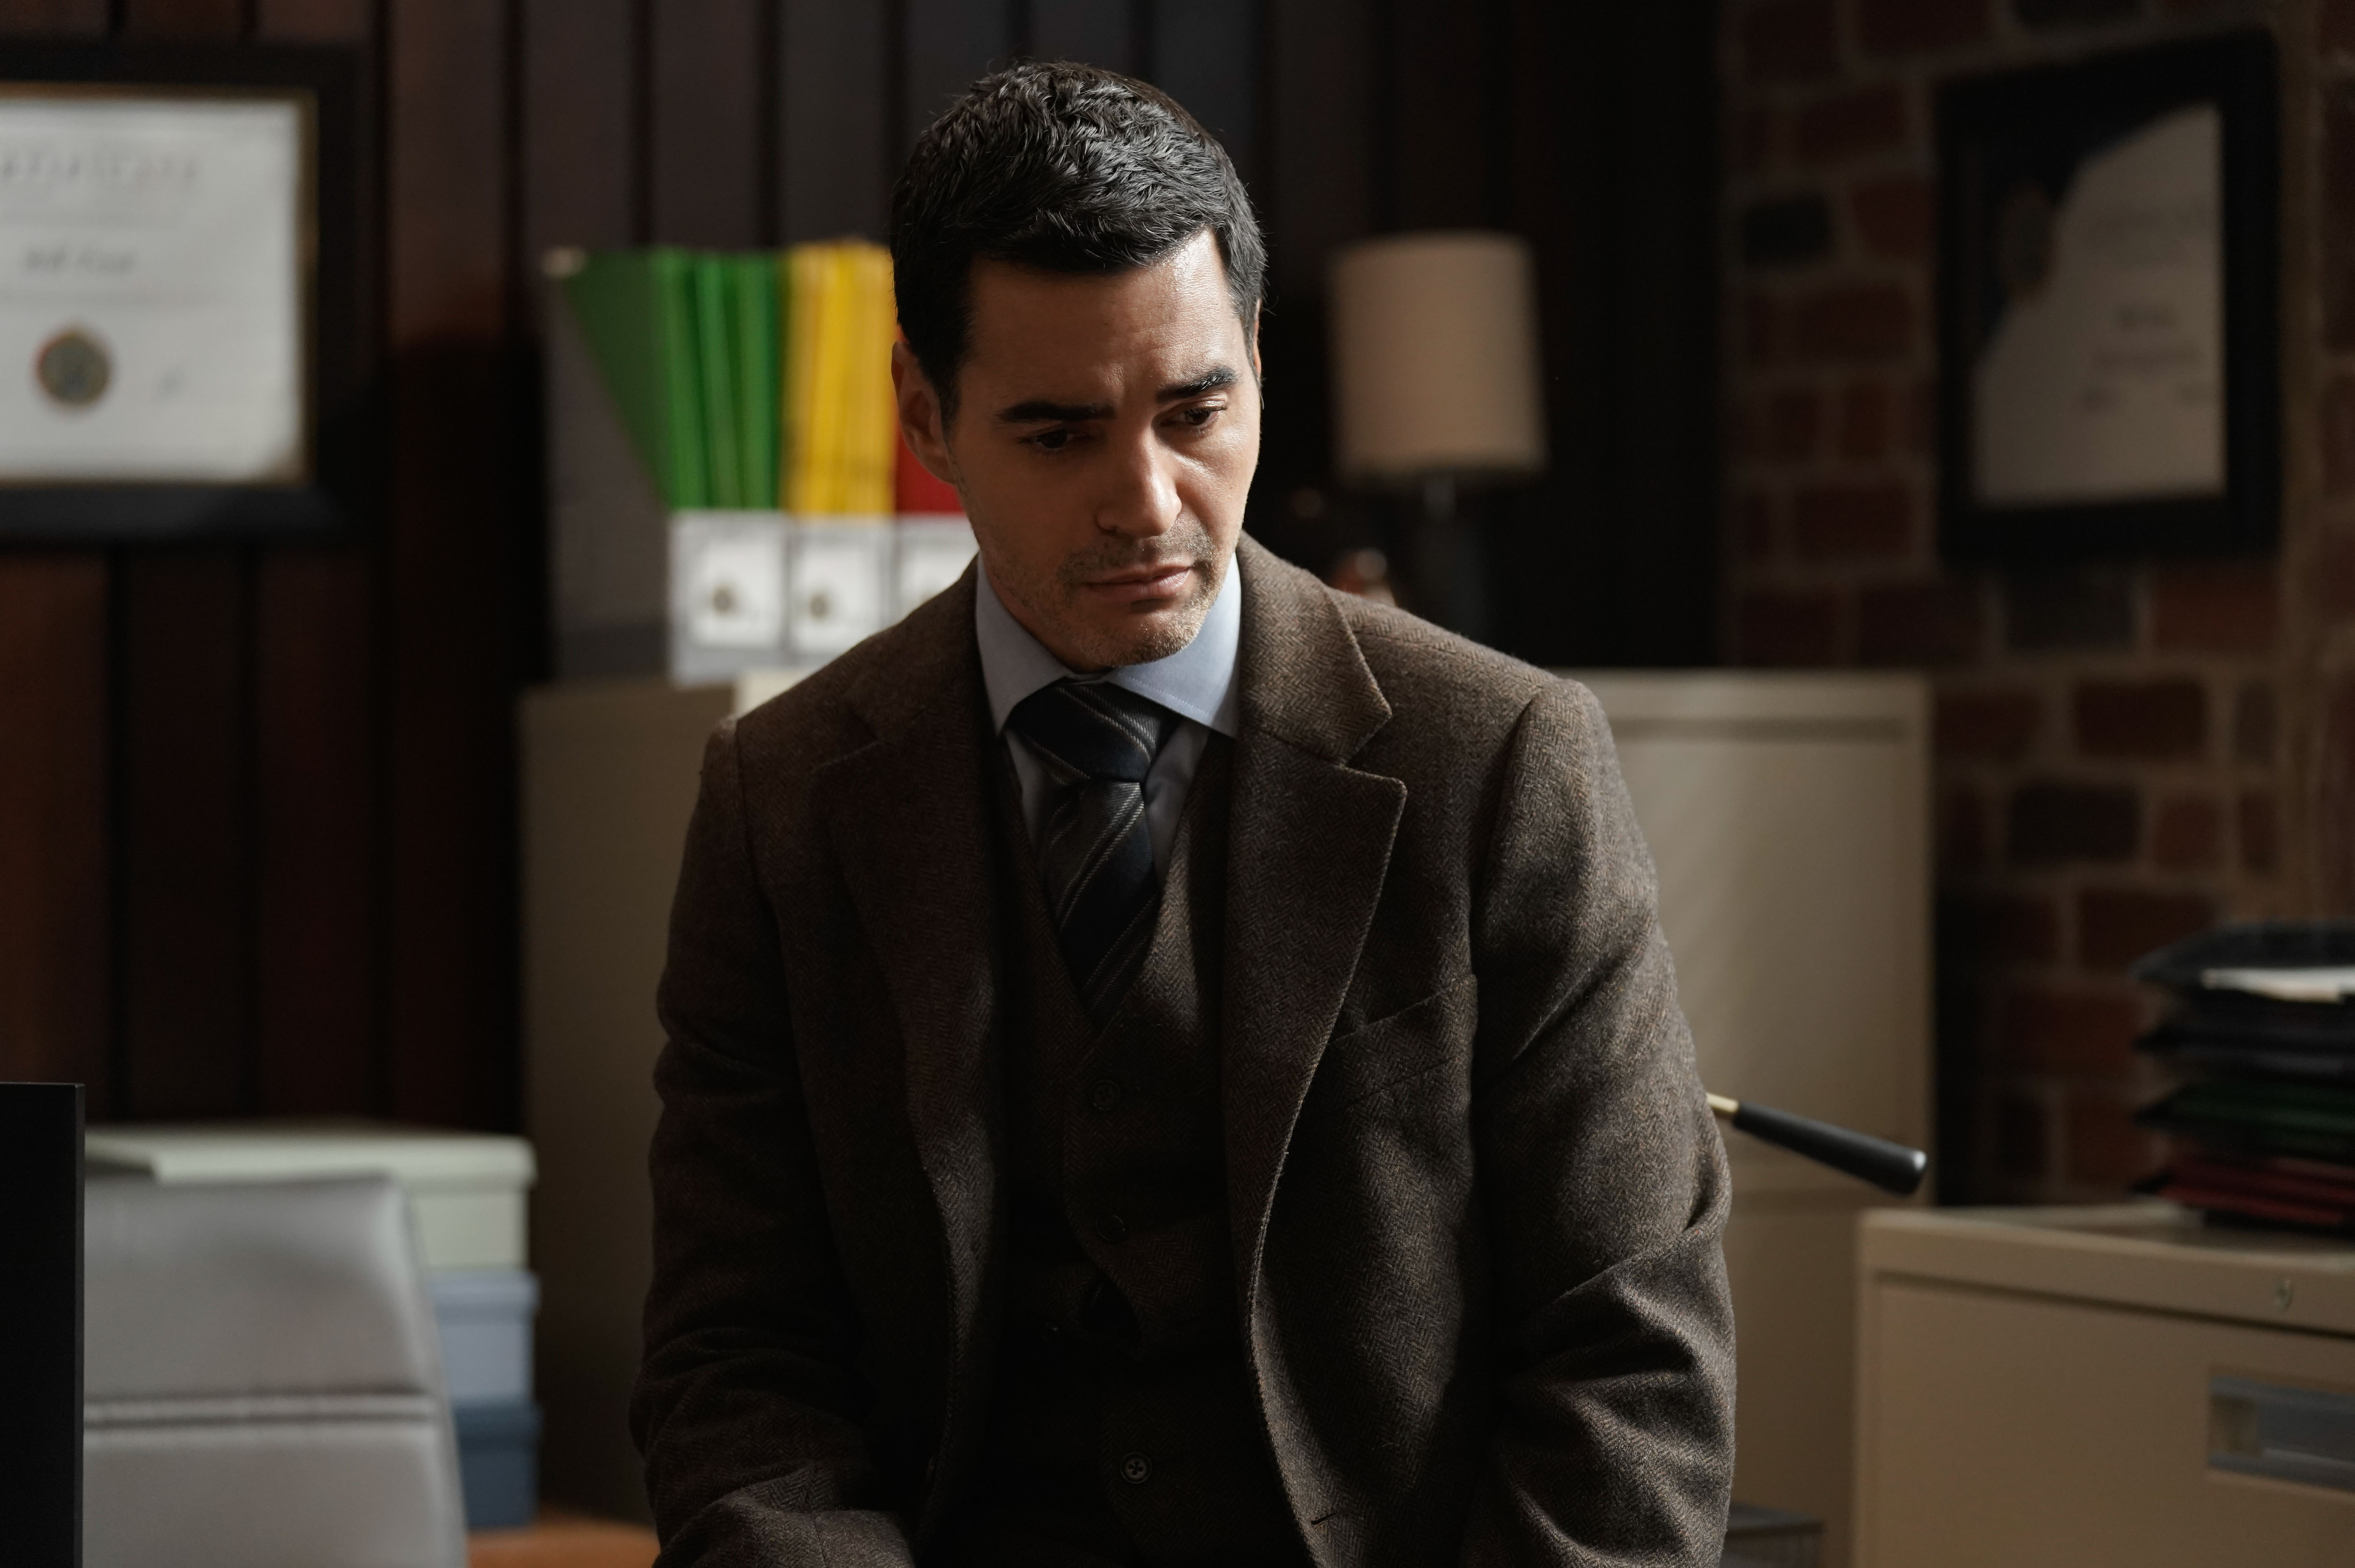 Ramón Rodríguez, in character as Will Trent in 'Will Trent' Season 1 Episode 5, wears a gray three-piece suit over a light blue button-up shirt and black and gray striped tie.